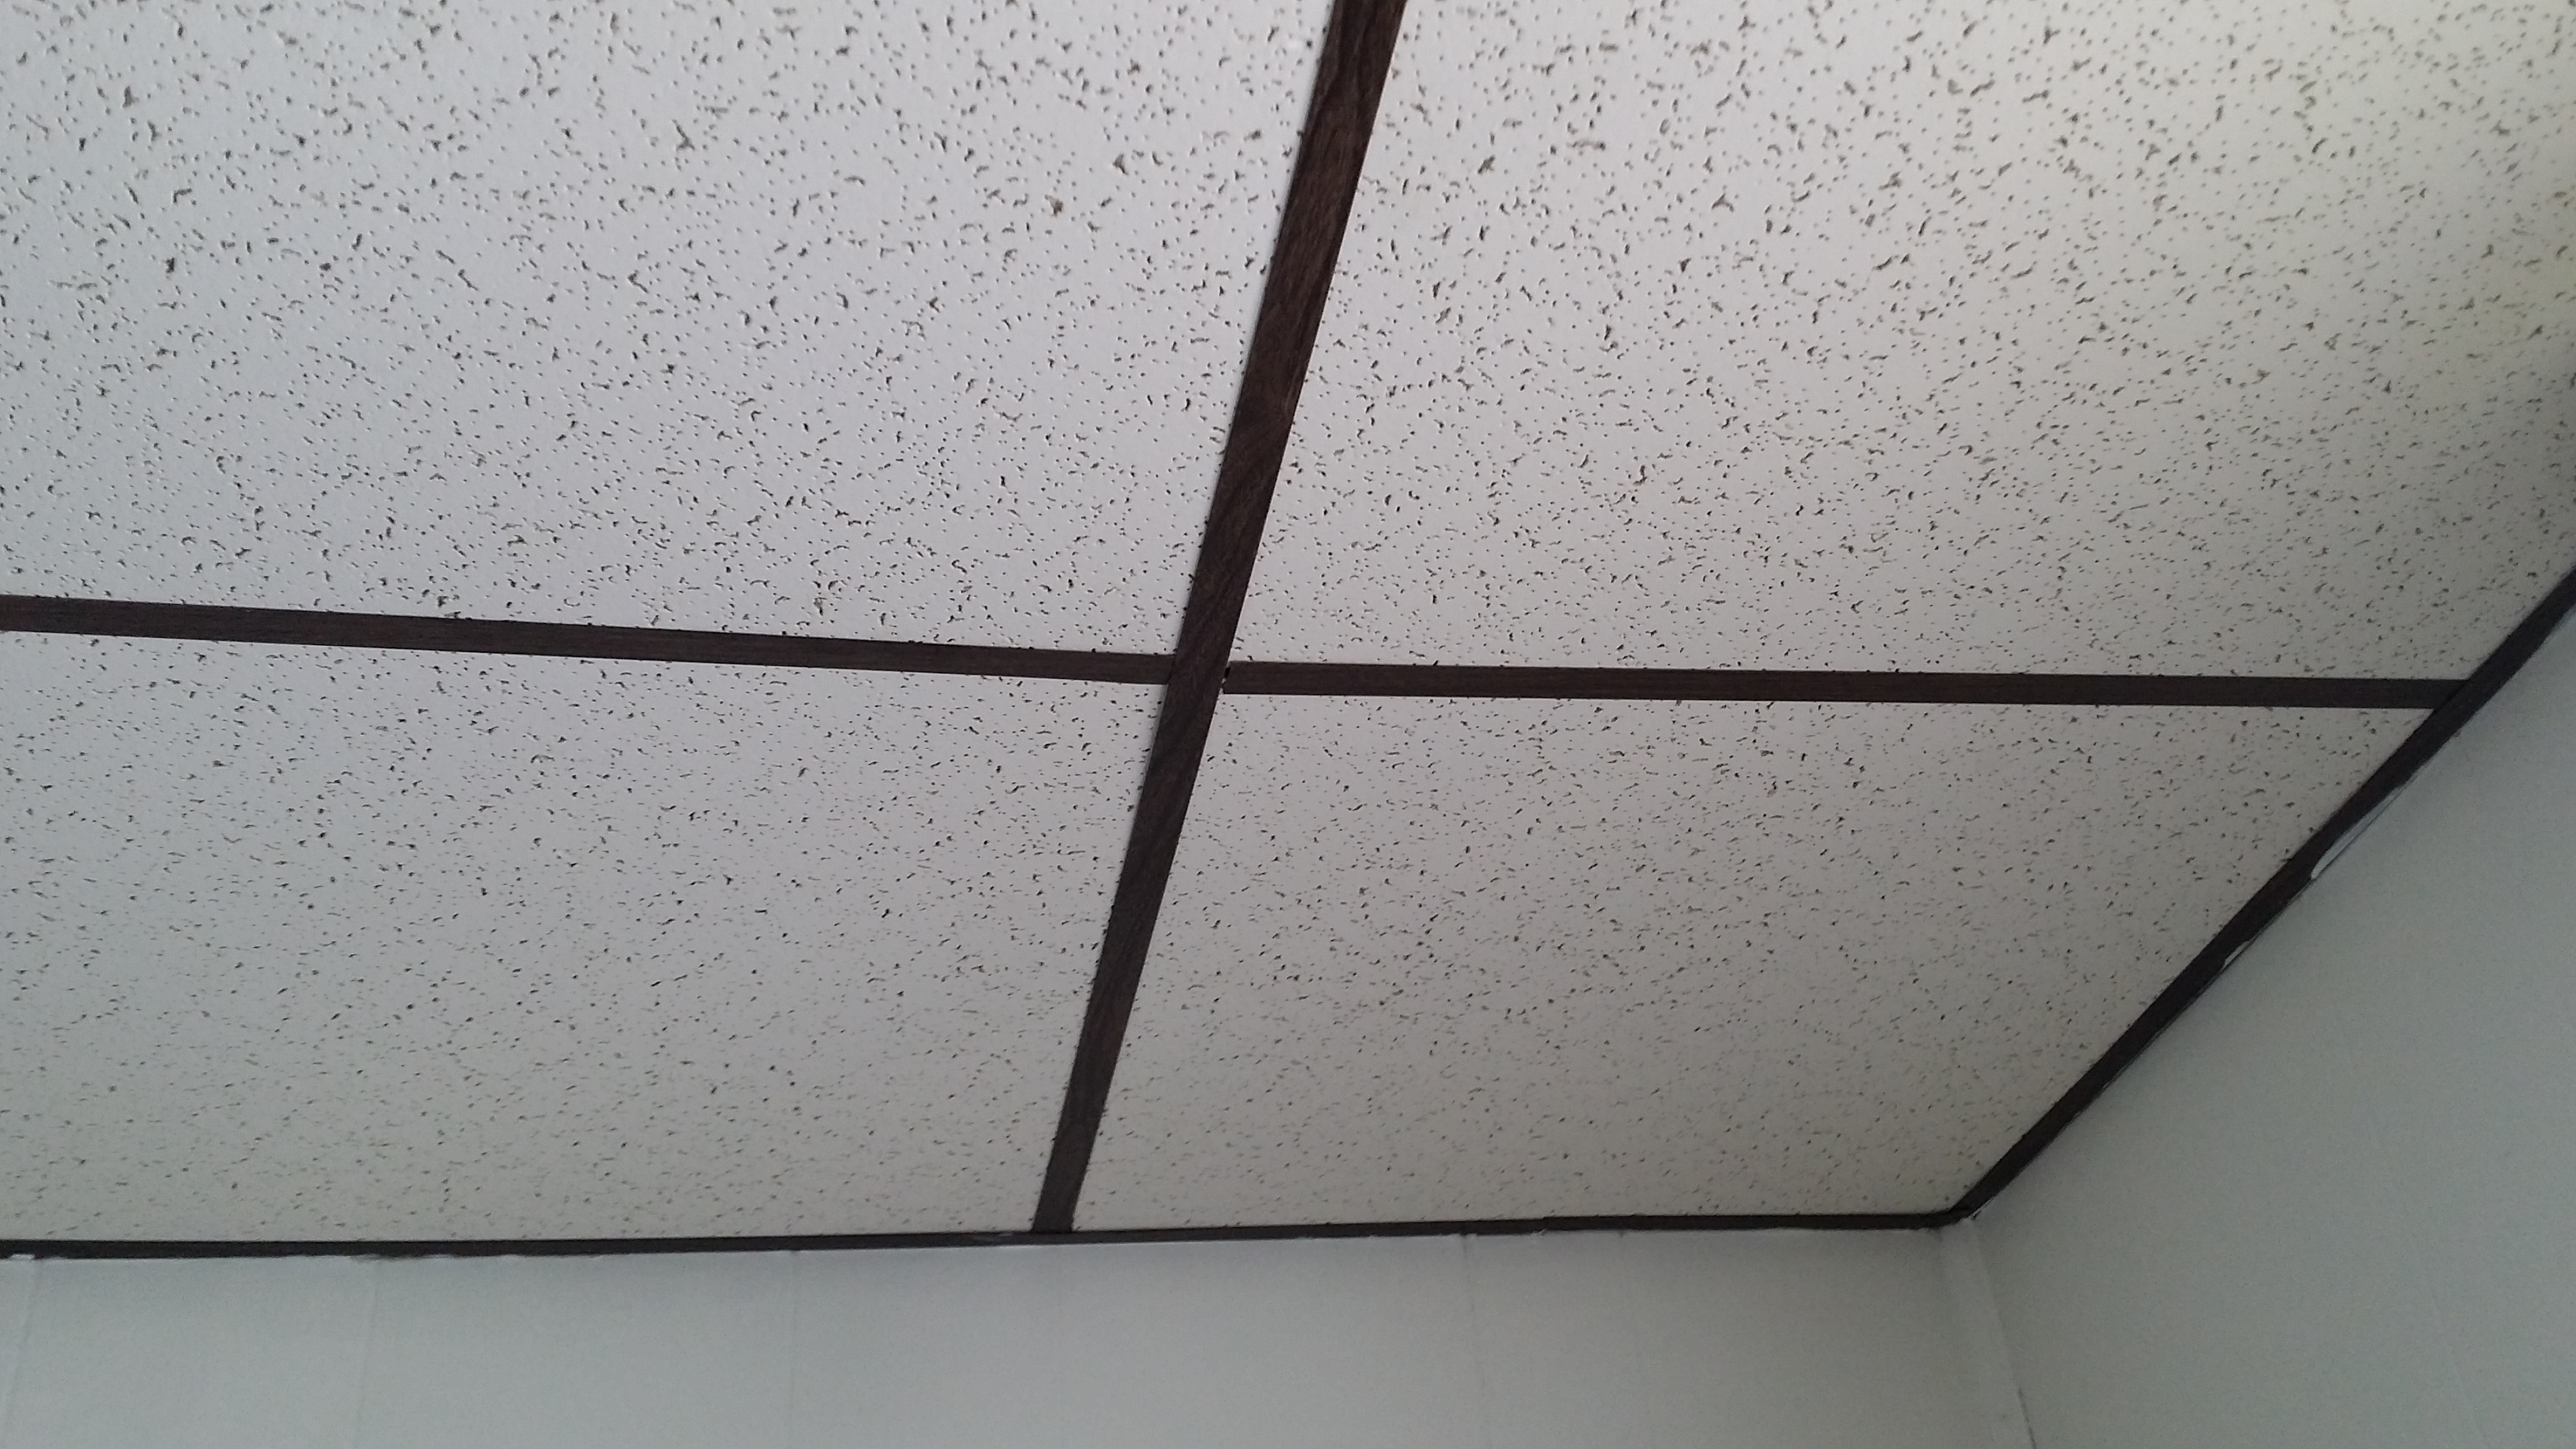 for the mold sensitized individual - drop ceilings may cover old water damage and mold